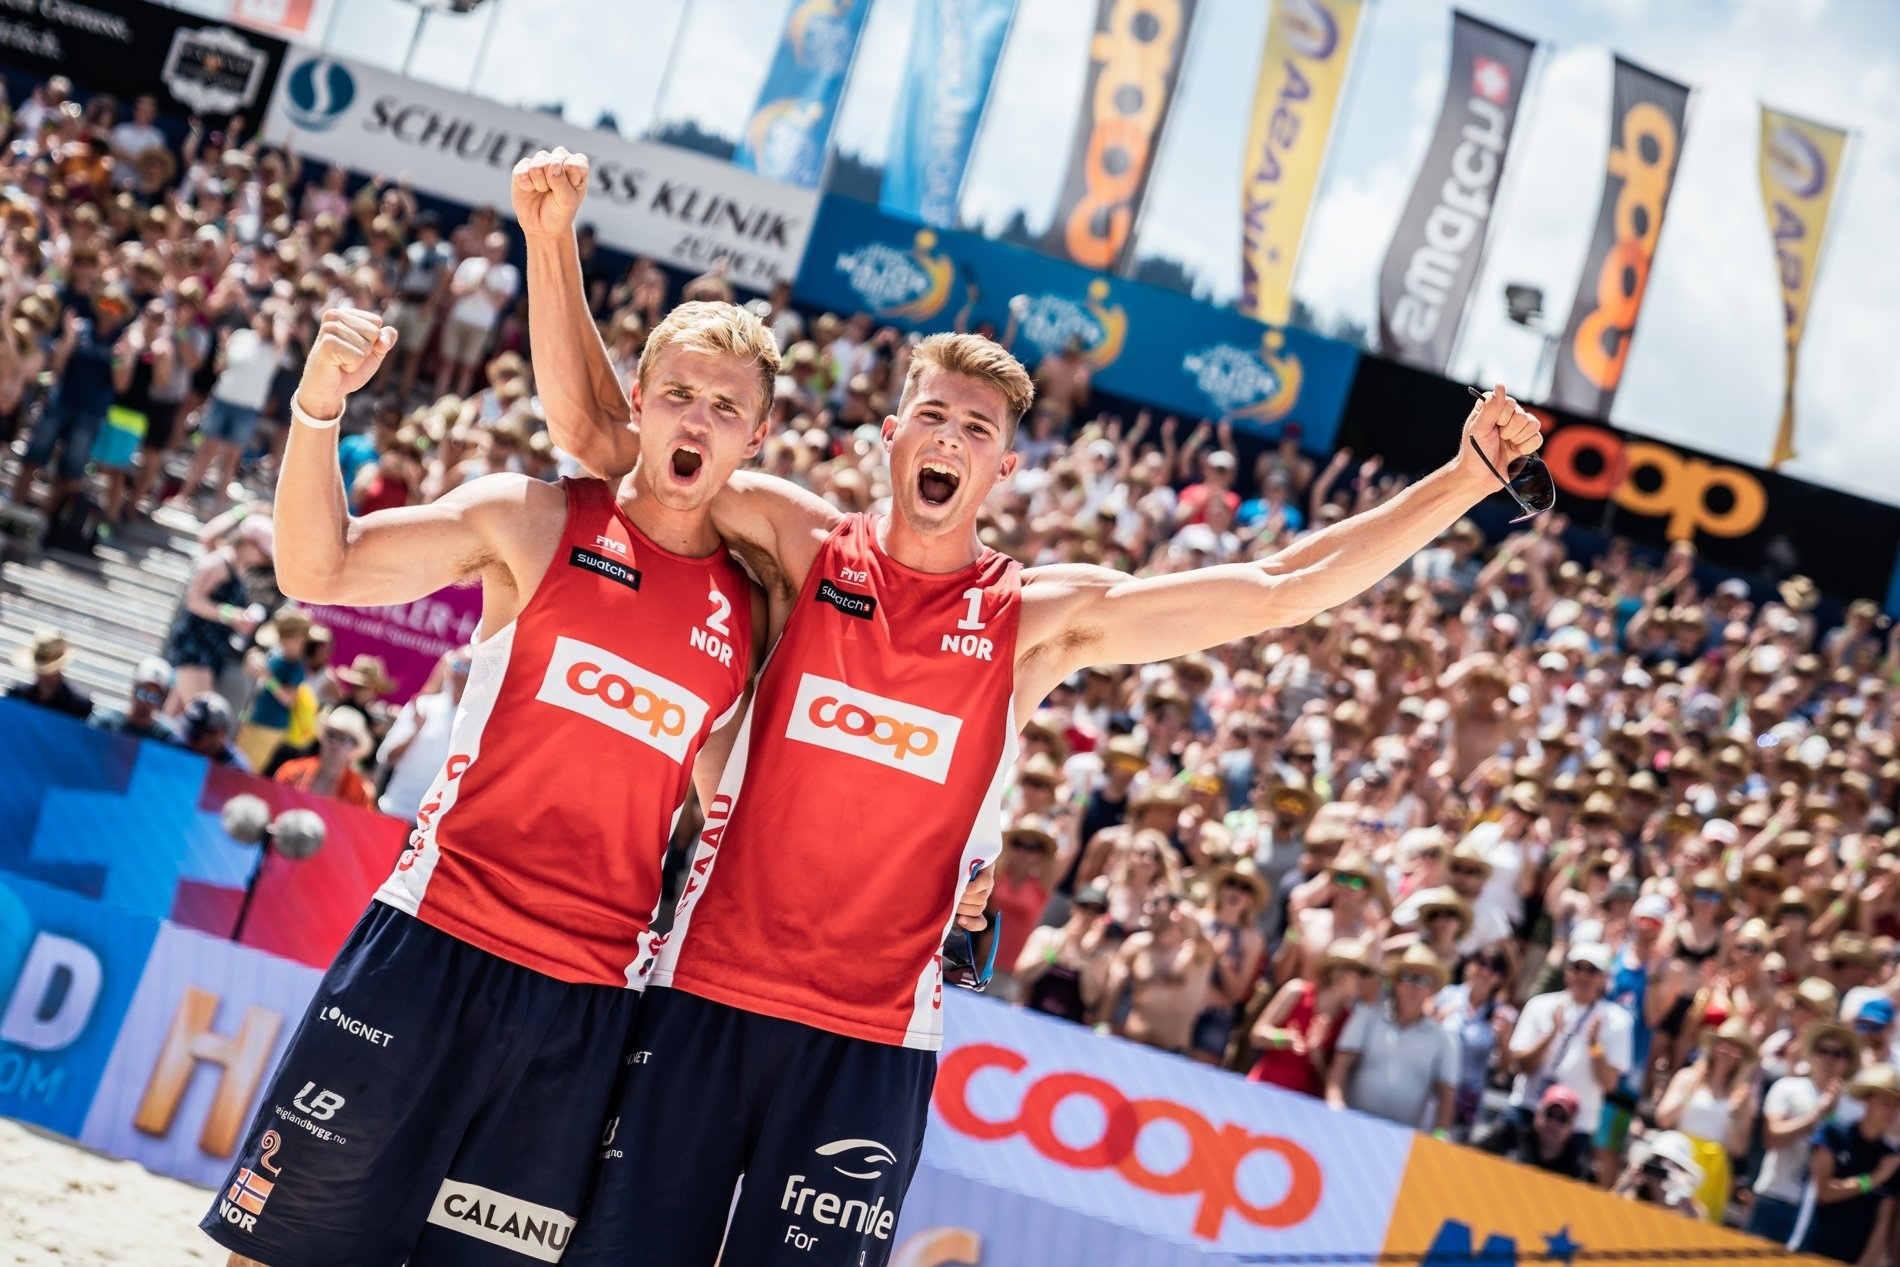 Anders and Christian celebrate their success in Gstaad